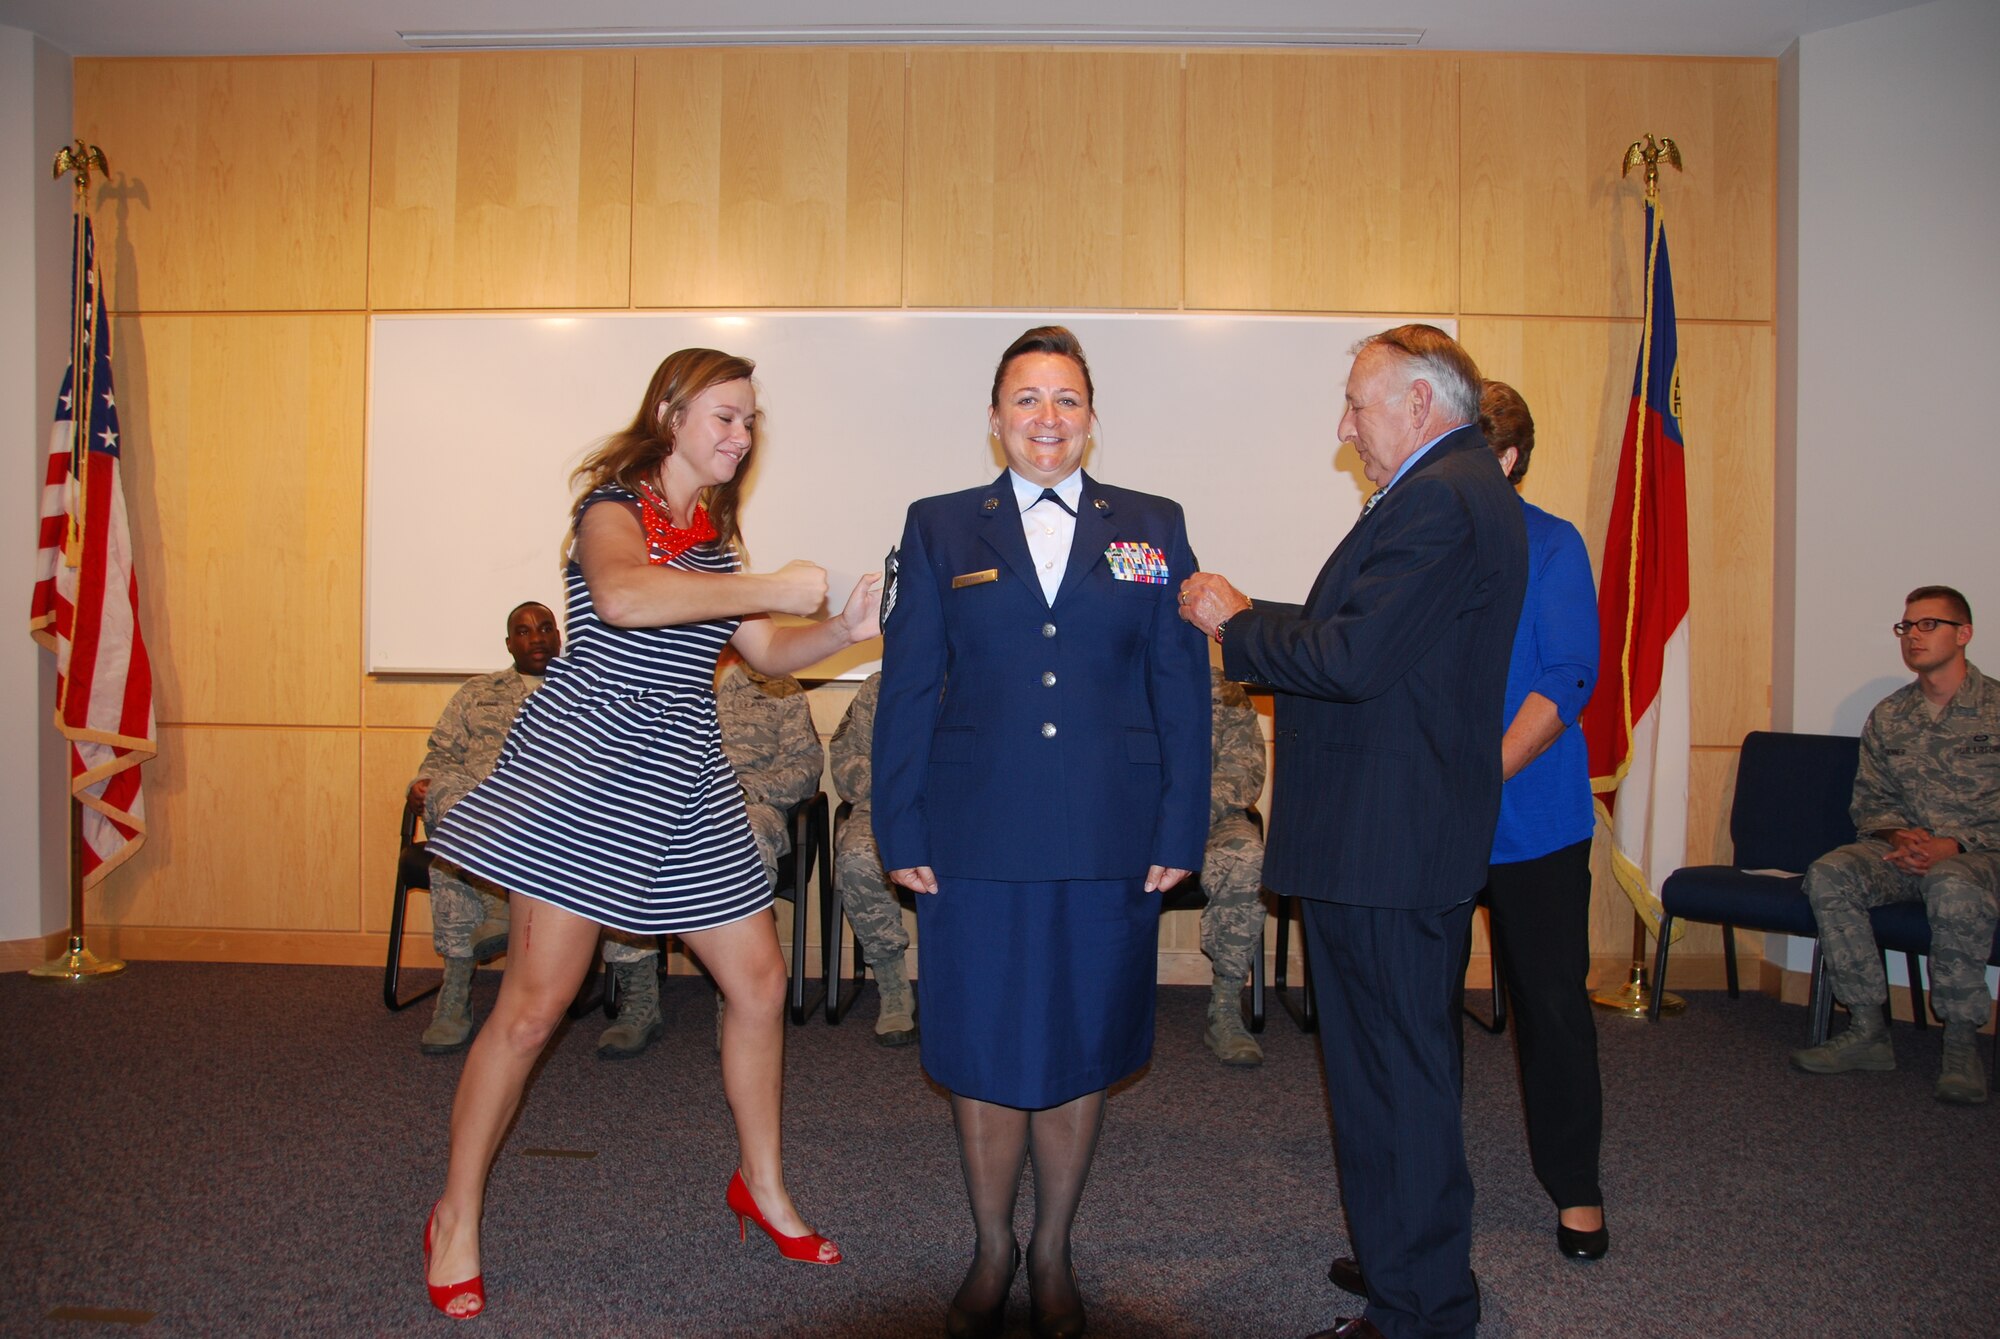 U.S. Air National Guard Chief Master Sgt. Angela Zephier, superintendent of the 156th Weather Flight, gets the rank of Chief tacked on by daughter Sarah, and father, retired Chief Warrant Officer (4) Larry Deal, during her promotion ceremony held at the 145th Combat Operations Group, New London, N.C. October 4, 2014. (U.S. Air National Guard photo by Master Sgt. Matthew Ciampa, 145th Weather Flight/Released)